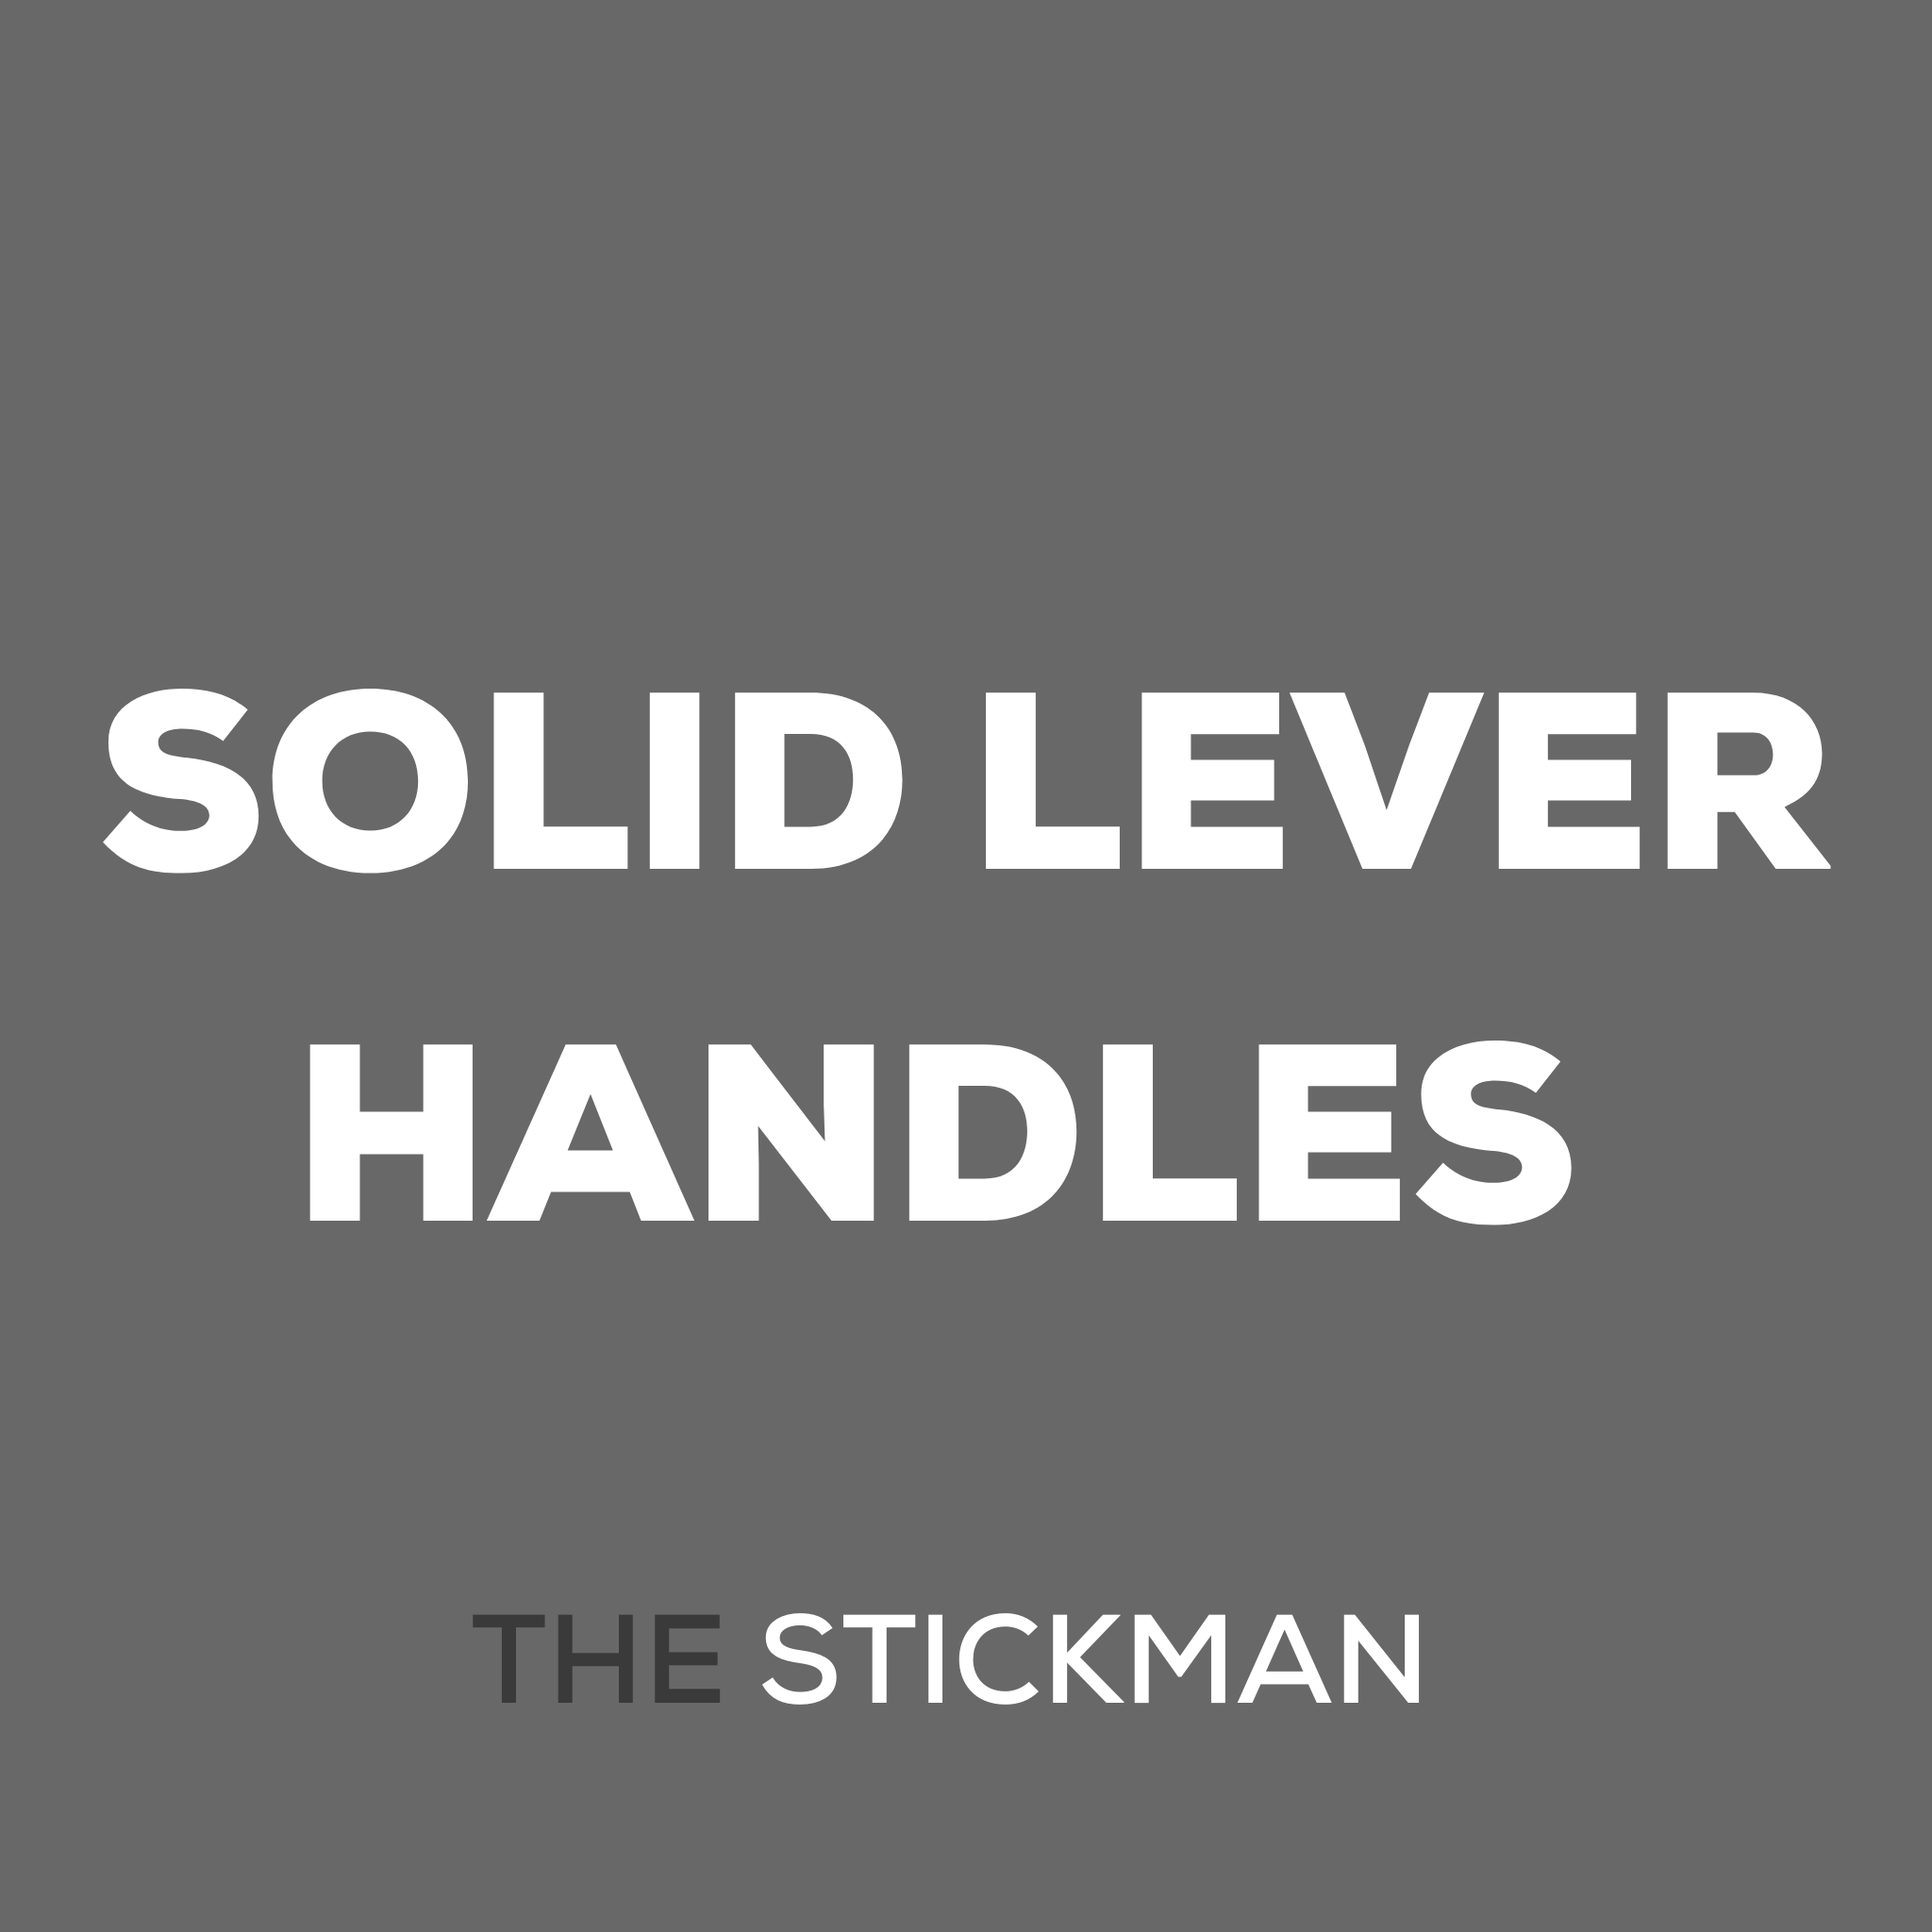 SOLID LEVER HANDLES